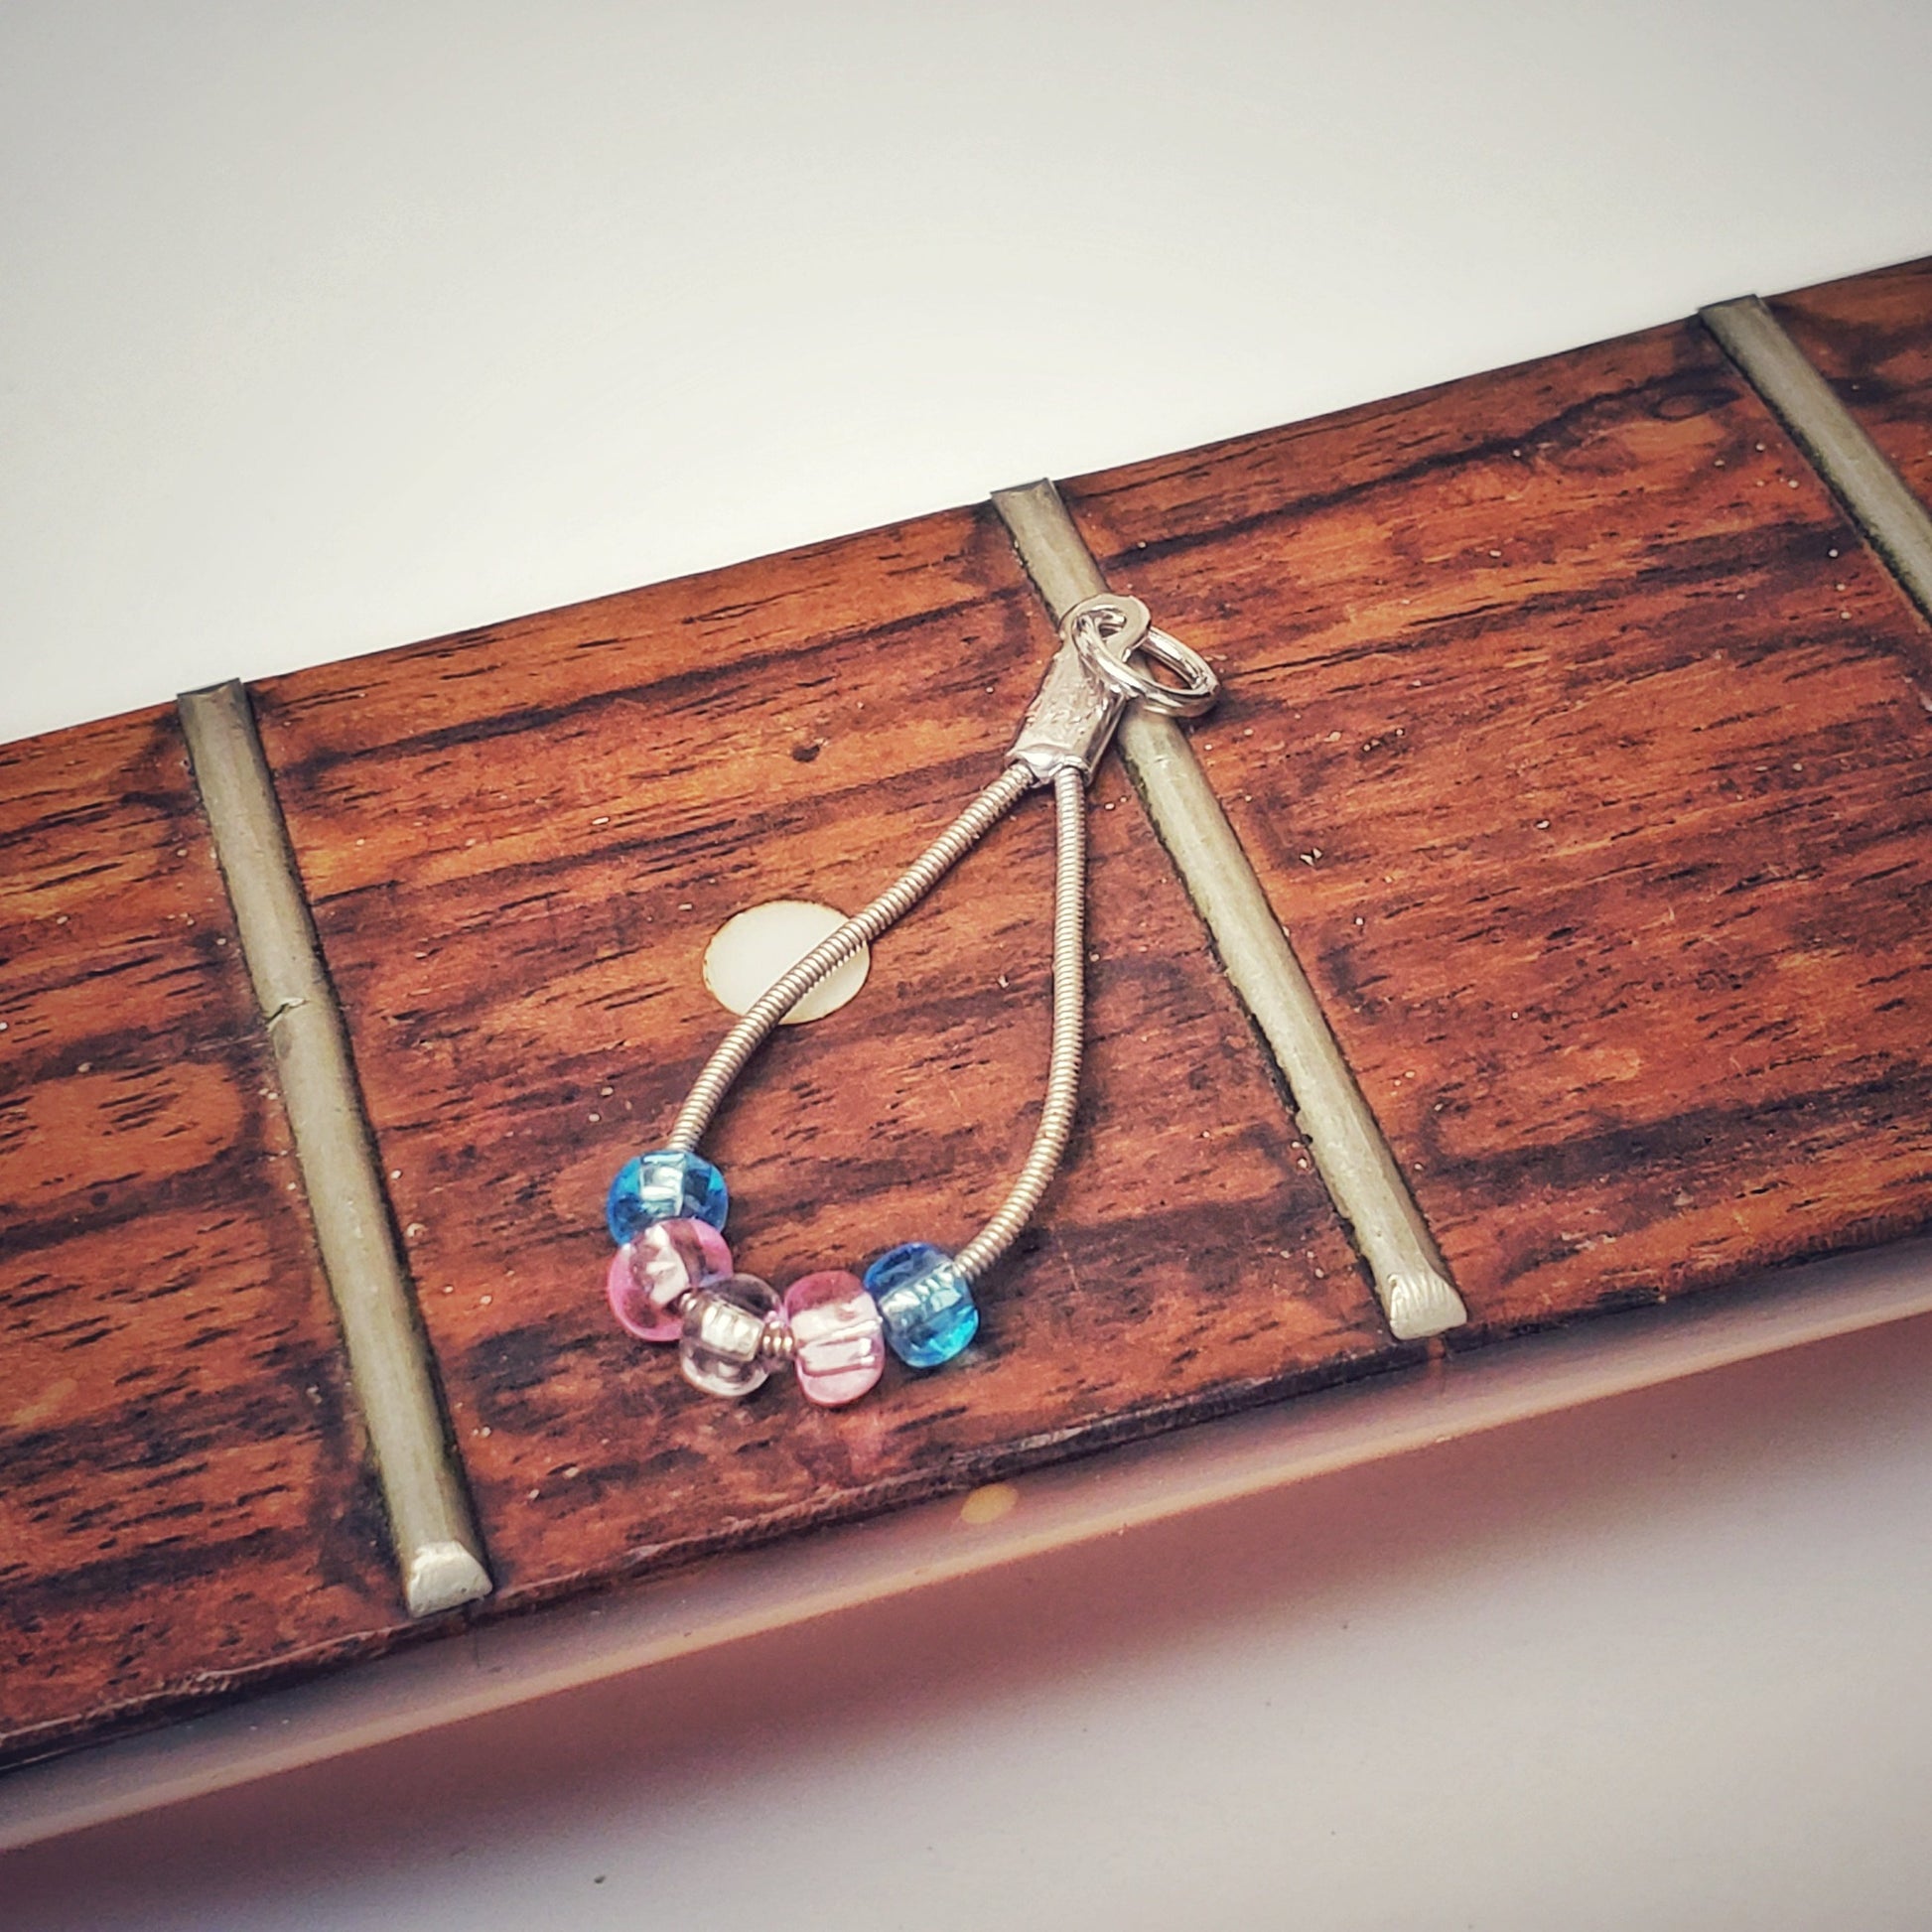 silver coloured teardrop pendant made from upcycled guitar strings - there are 5 beads representing the colours of the transgender pride flag - 2 blue, 2 pink and 1 white - pendant is sitting on the neck of a guitar which has no stings